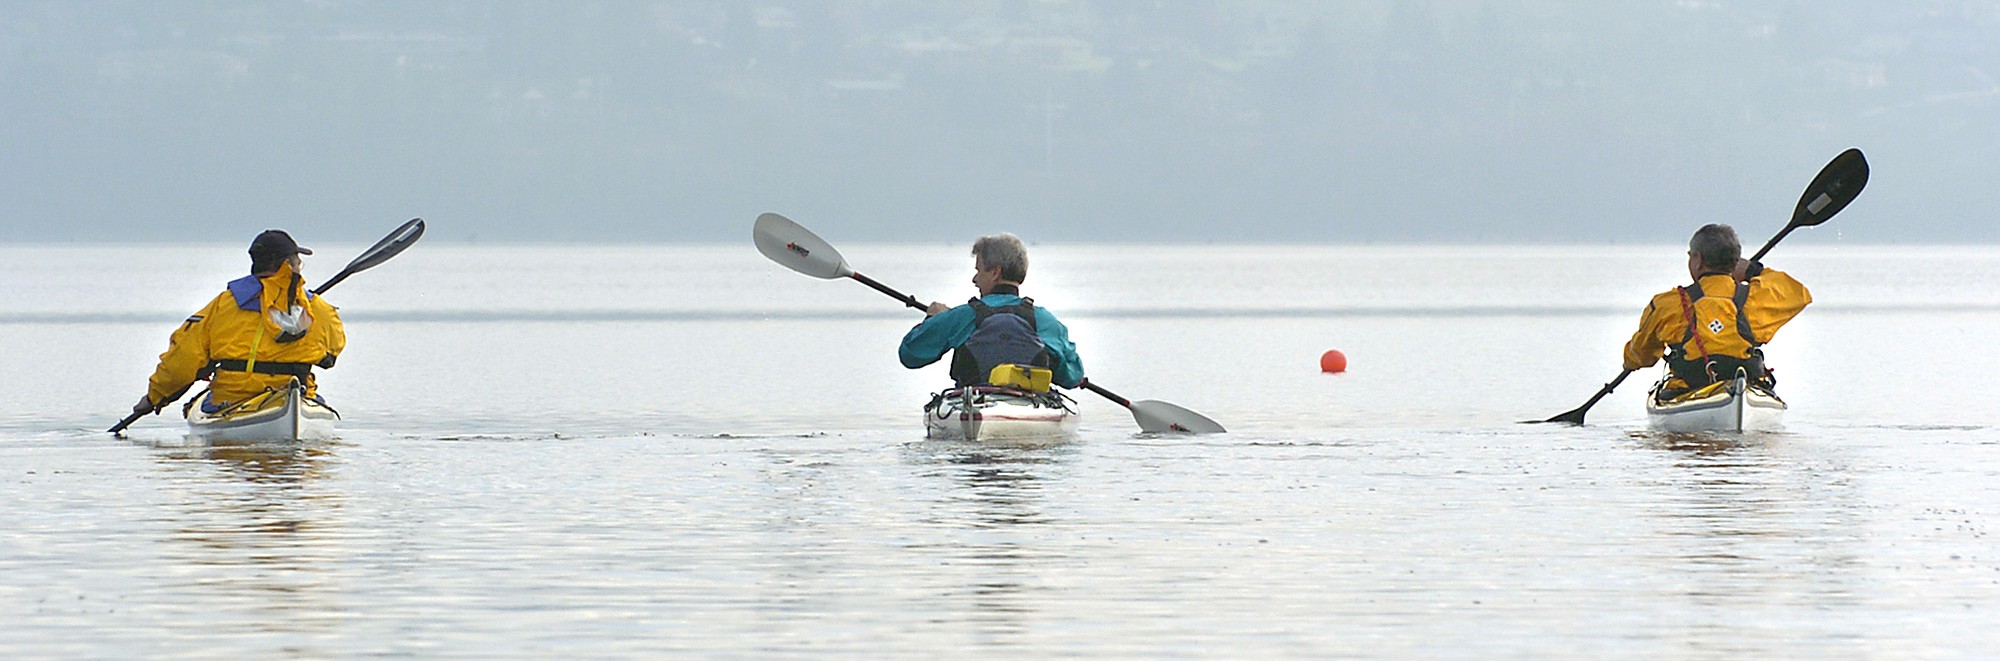 2/28/04-Vancouver, WA--L-R--Norm Sharp, Frank Klejmont and John Hren, all from Portland, paddle their kayaks across a calm Vancouver Lake Saturday morning.(Steven Lane/The Columbian)